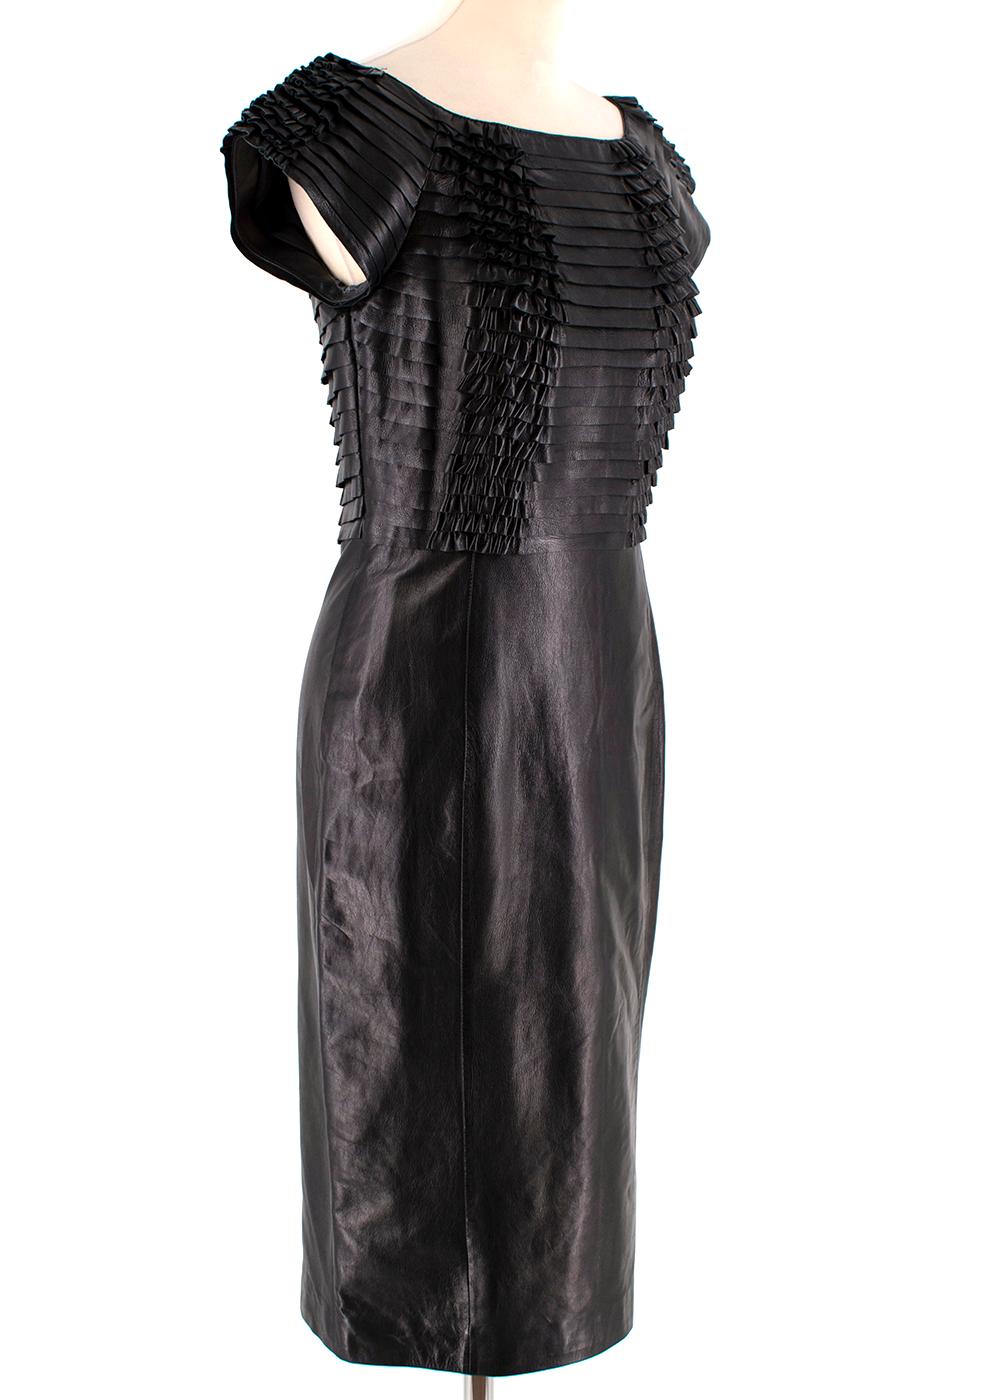 Gucci Black Ruffled Leather Dress

- Pleated layers on the upper body 
- Soft lamb skin leather
- Silk black lining
- Mid weight fabric 
- Capped short sleeves
- Pencil skirt just below the knee
- Wide round neck
 
Made in Italy

Professional